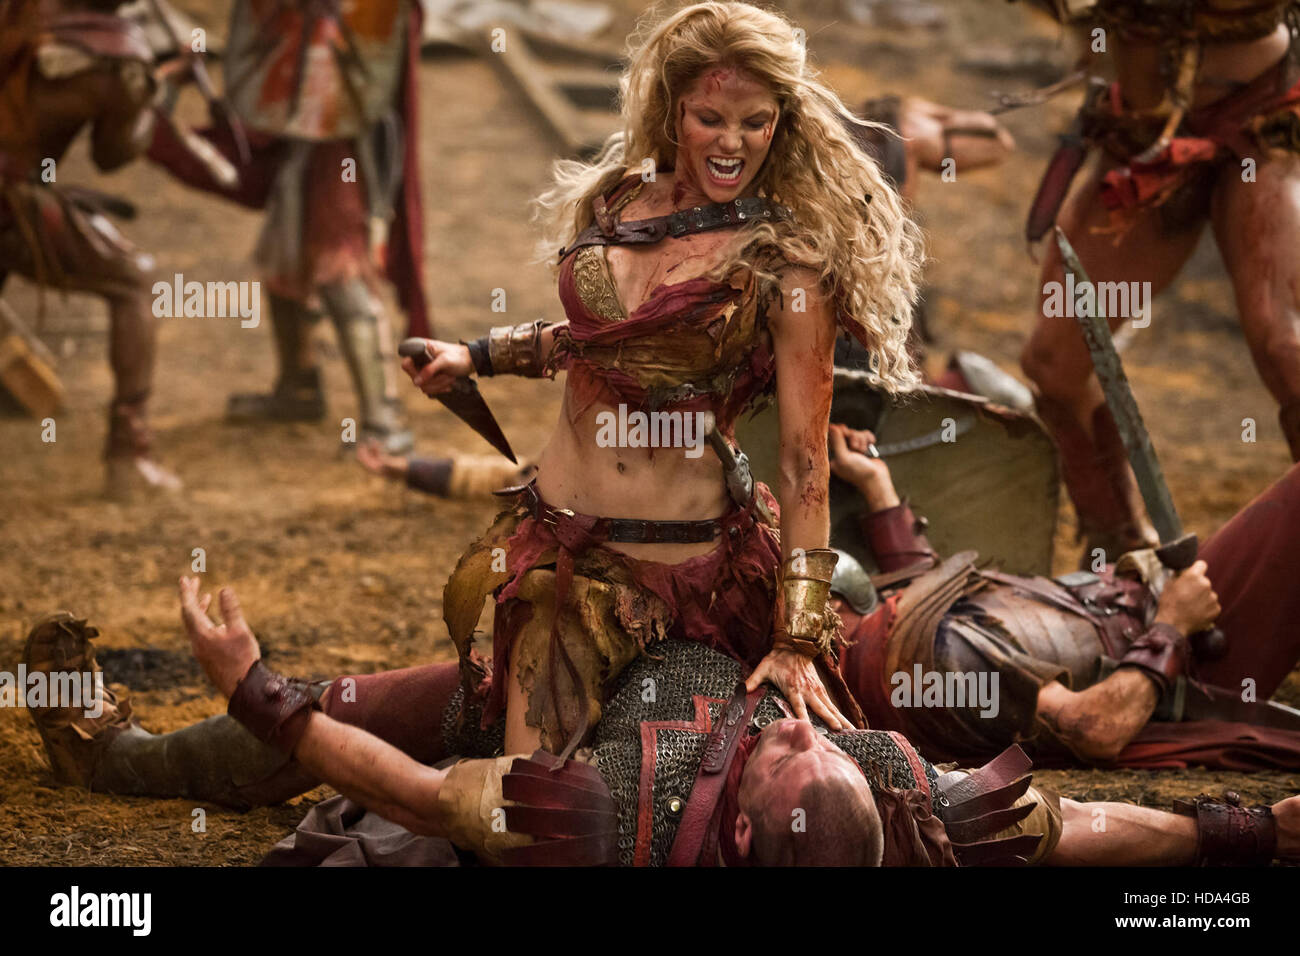 SPARTACUS: WAR OF THE DAMNED, Ellen Hollman in 'Enemies of Rome' (Season 3,  Episode 1, aired January 25, 2013), 2010-, ph: Matt Stock Photo - Alamy